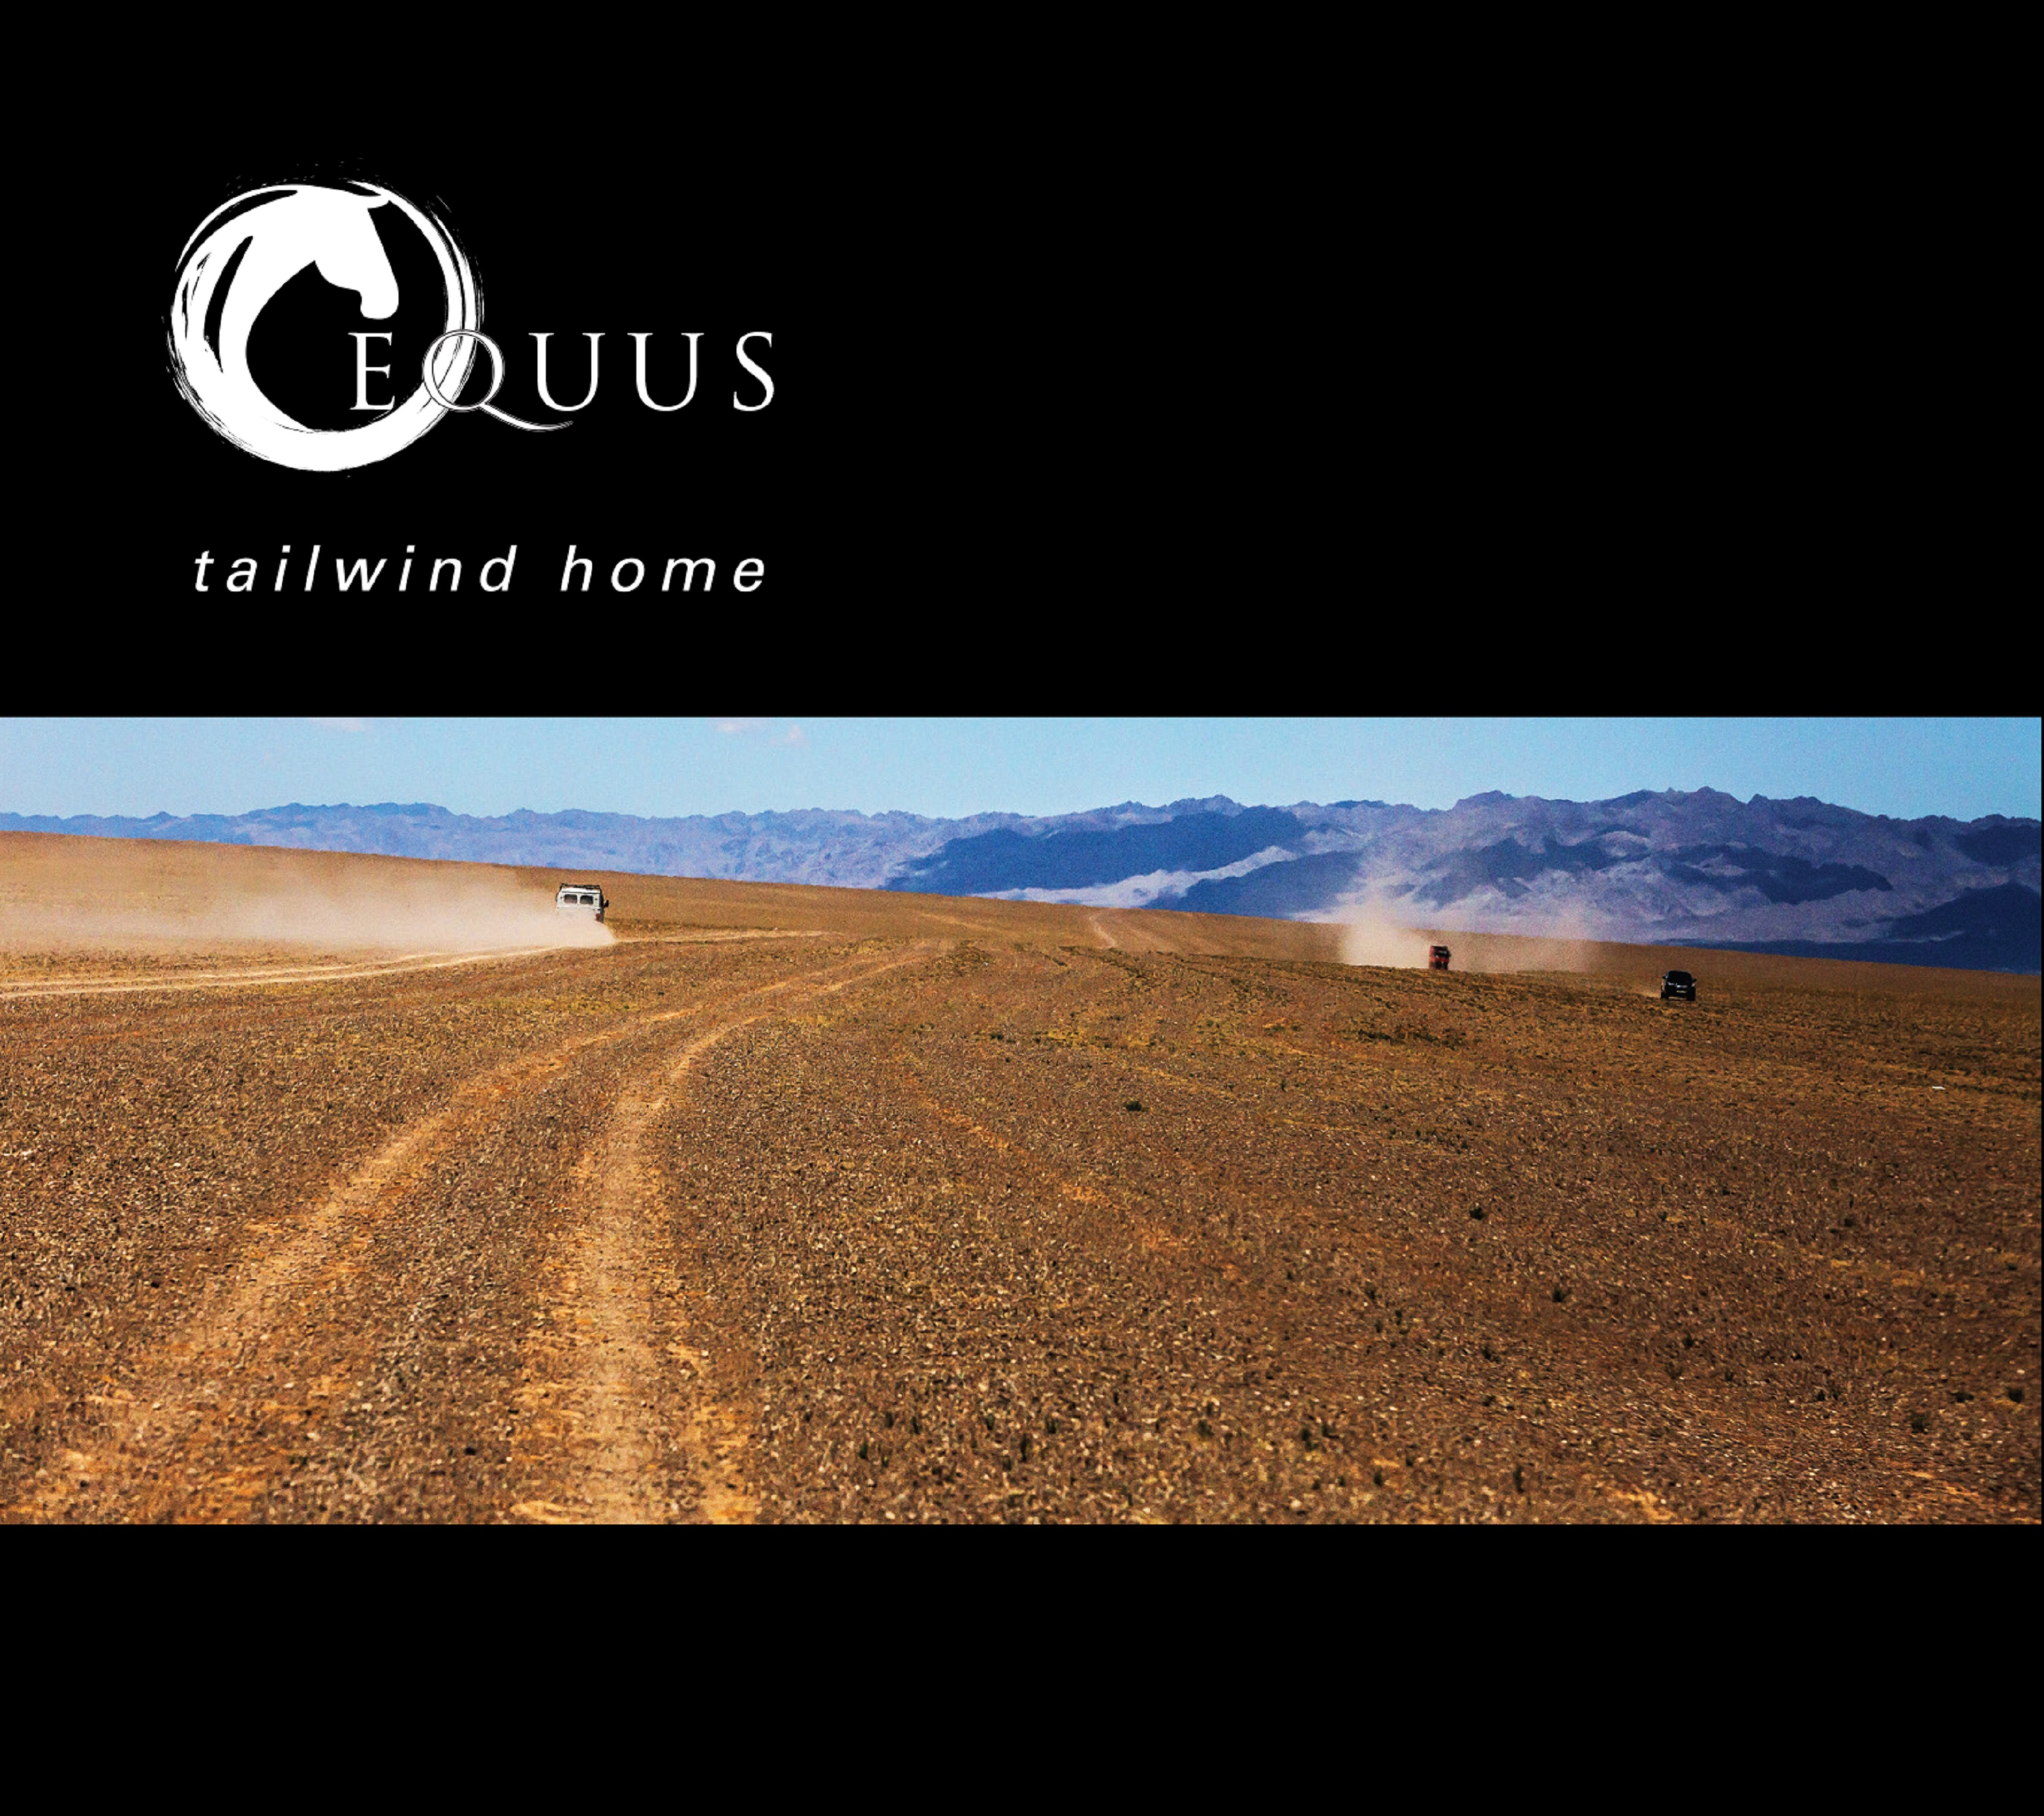 Equus CD Cover resize